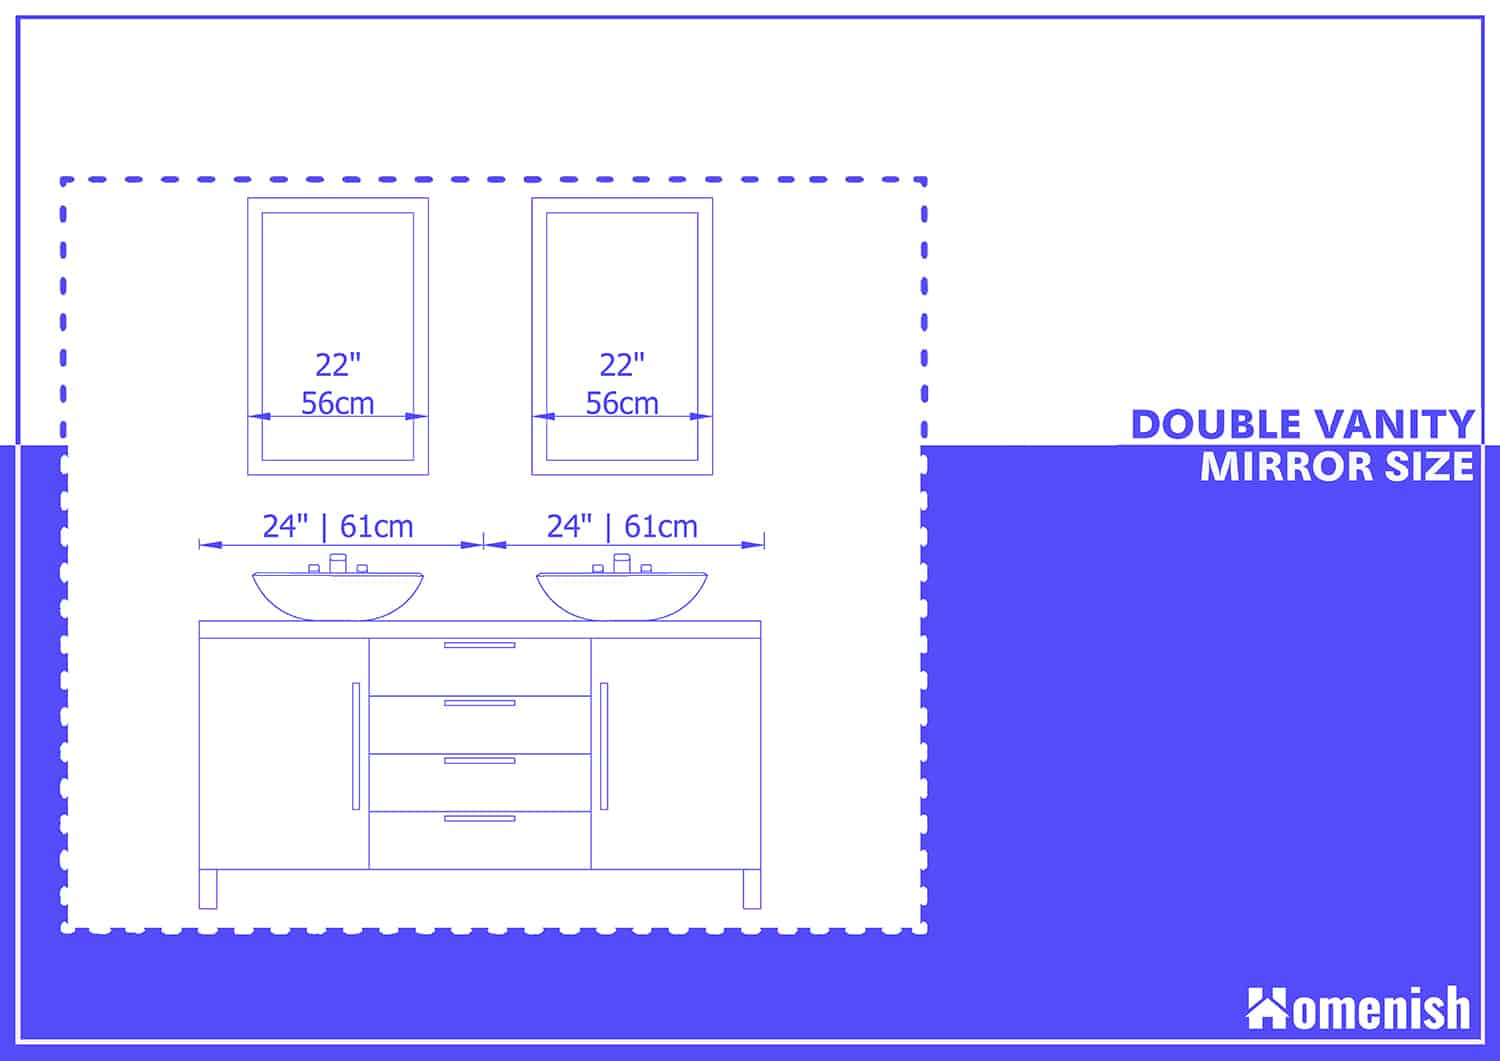 Double Vanity Mirror Size, What Size Should Your Bathroom Mirror Be